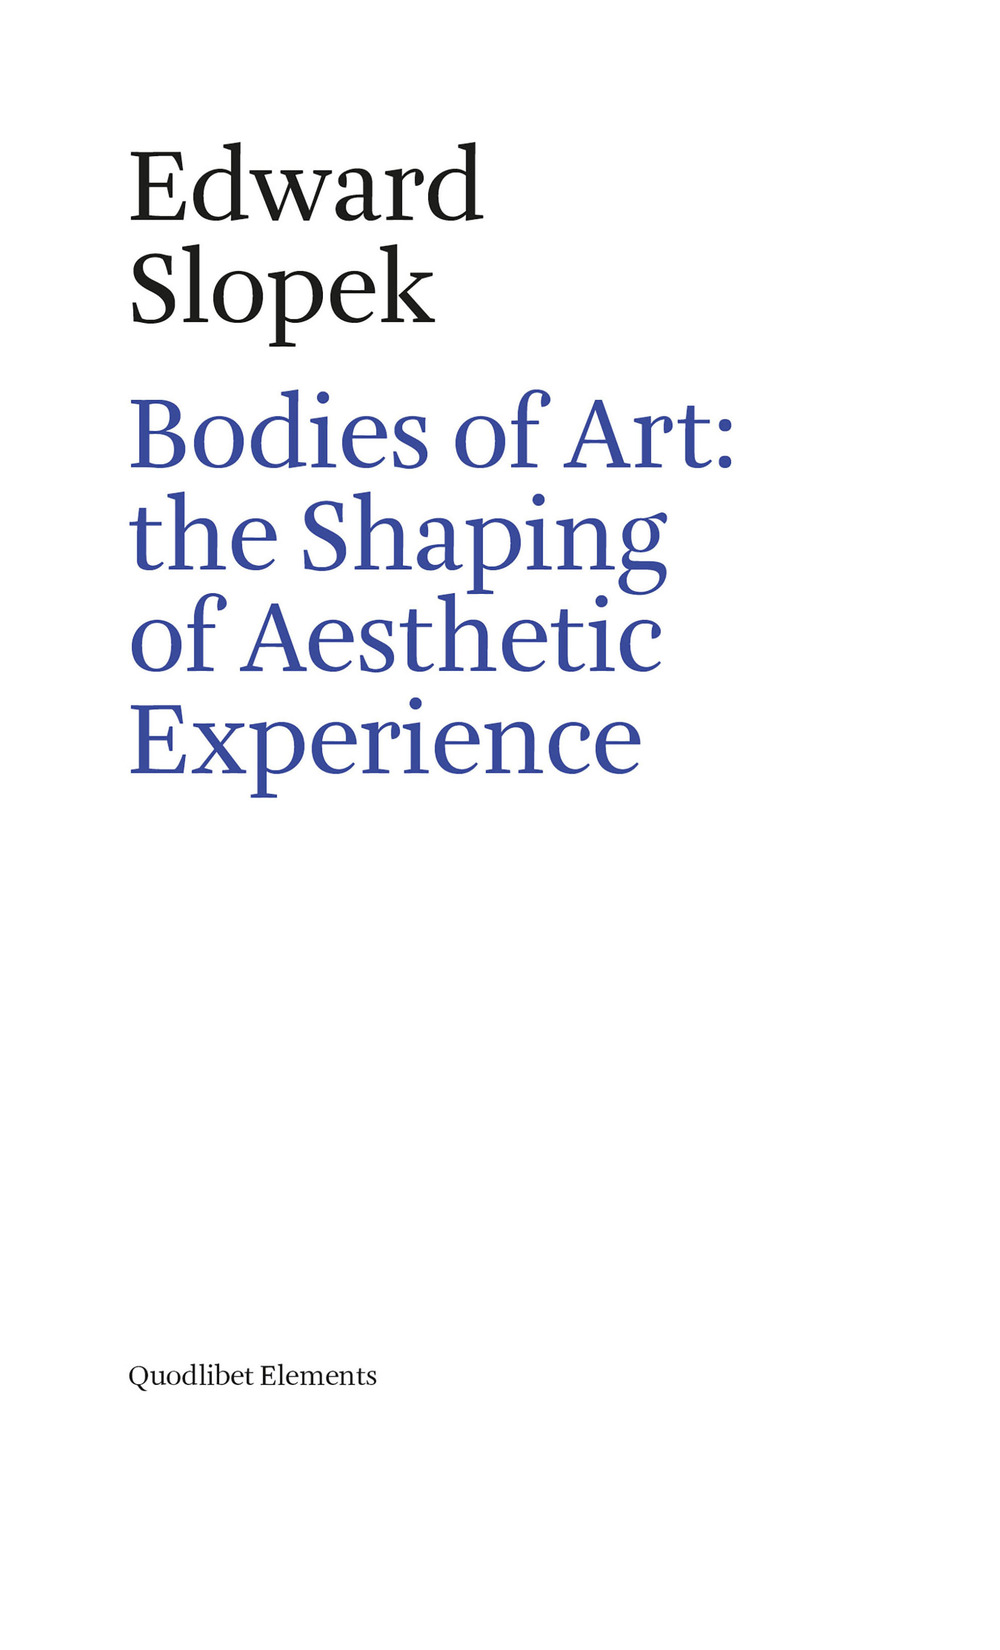 BODIES OF ART: THE SHAPING OF AESTHETIC EXPERIENCE - 9788822907158